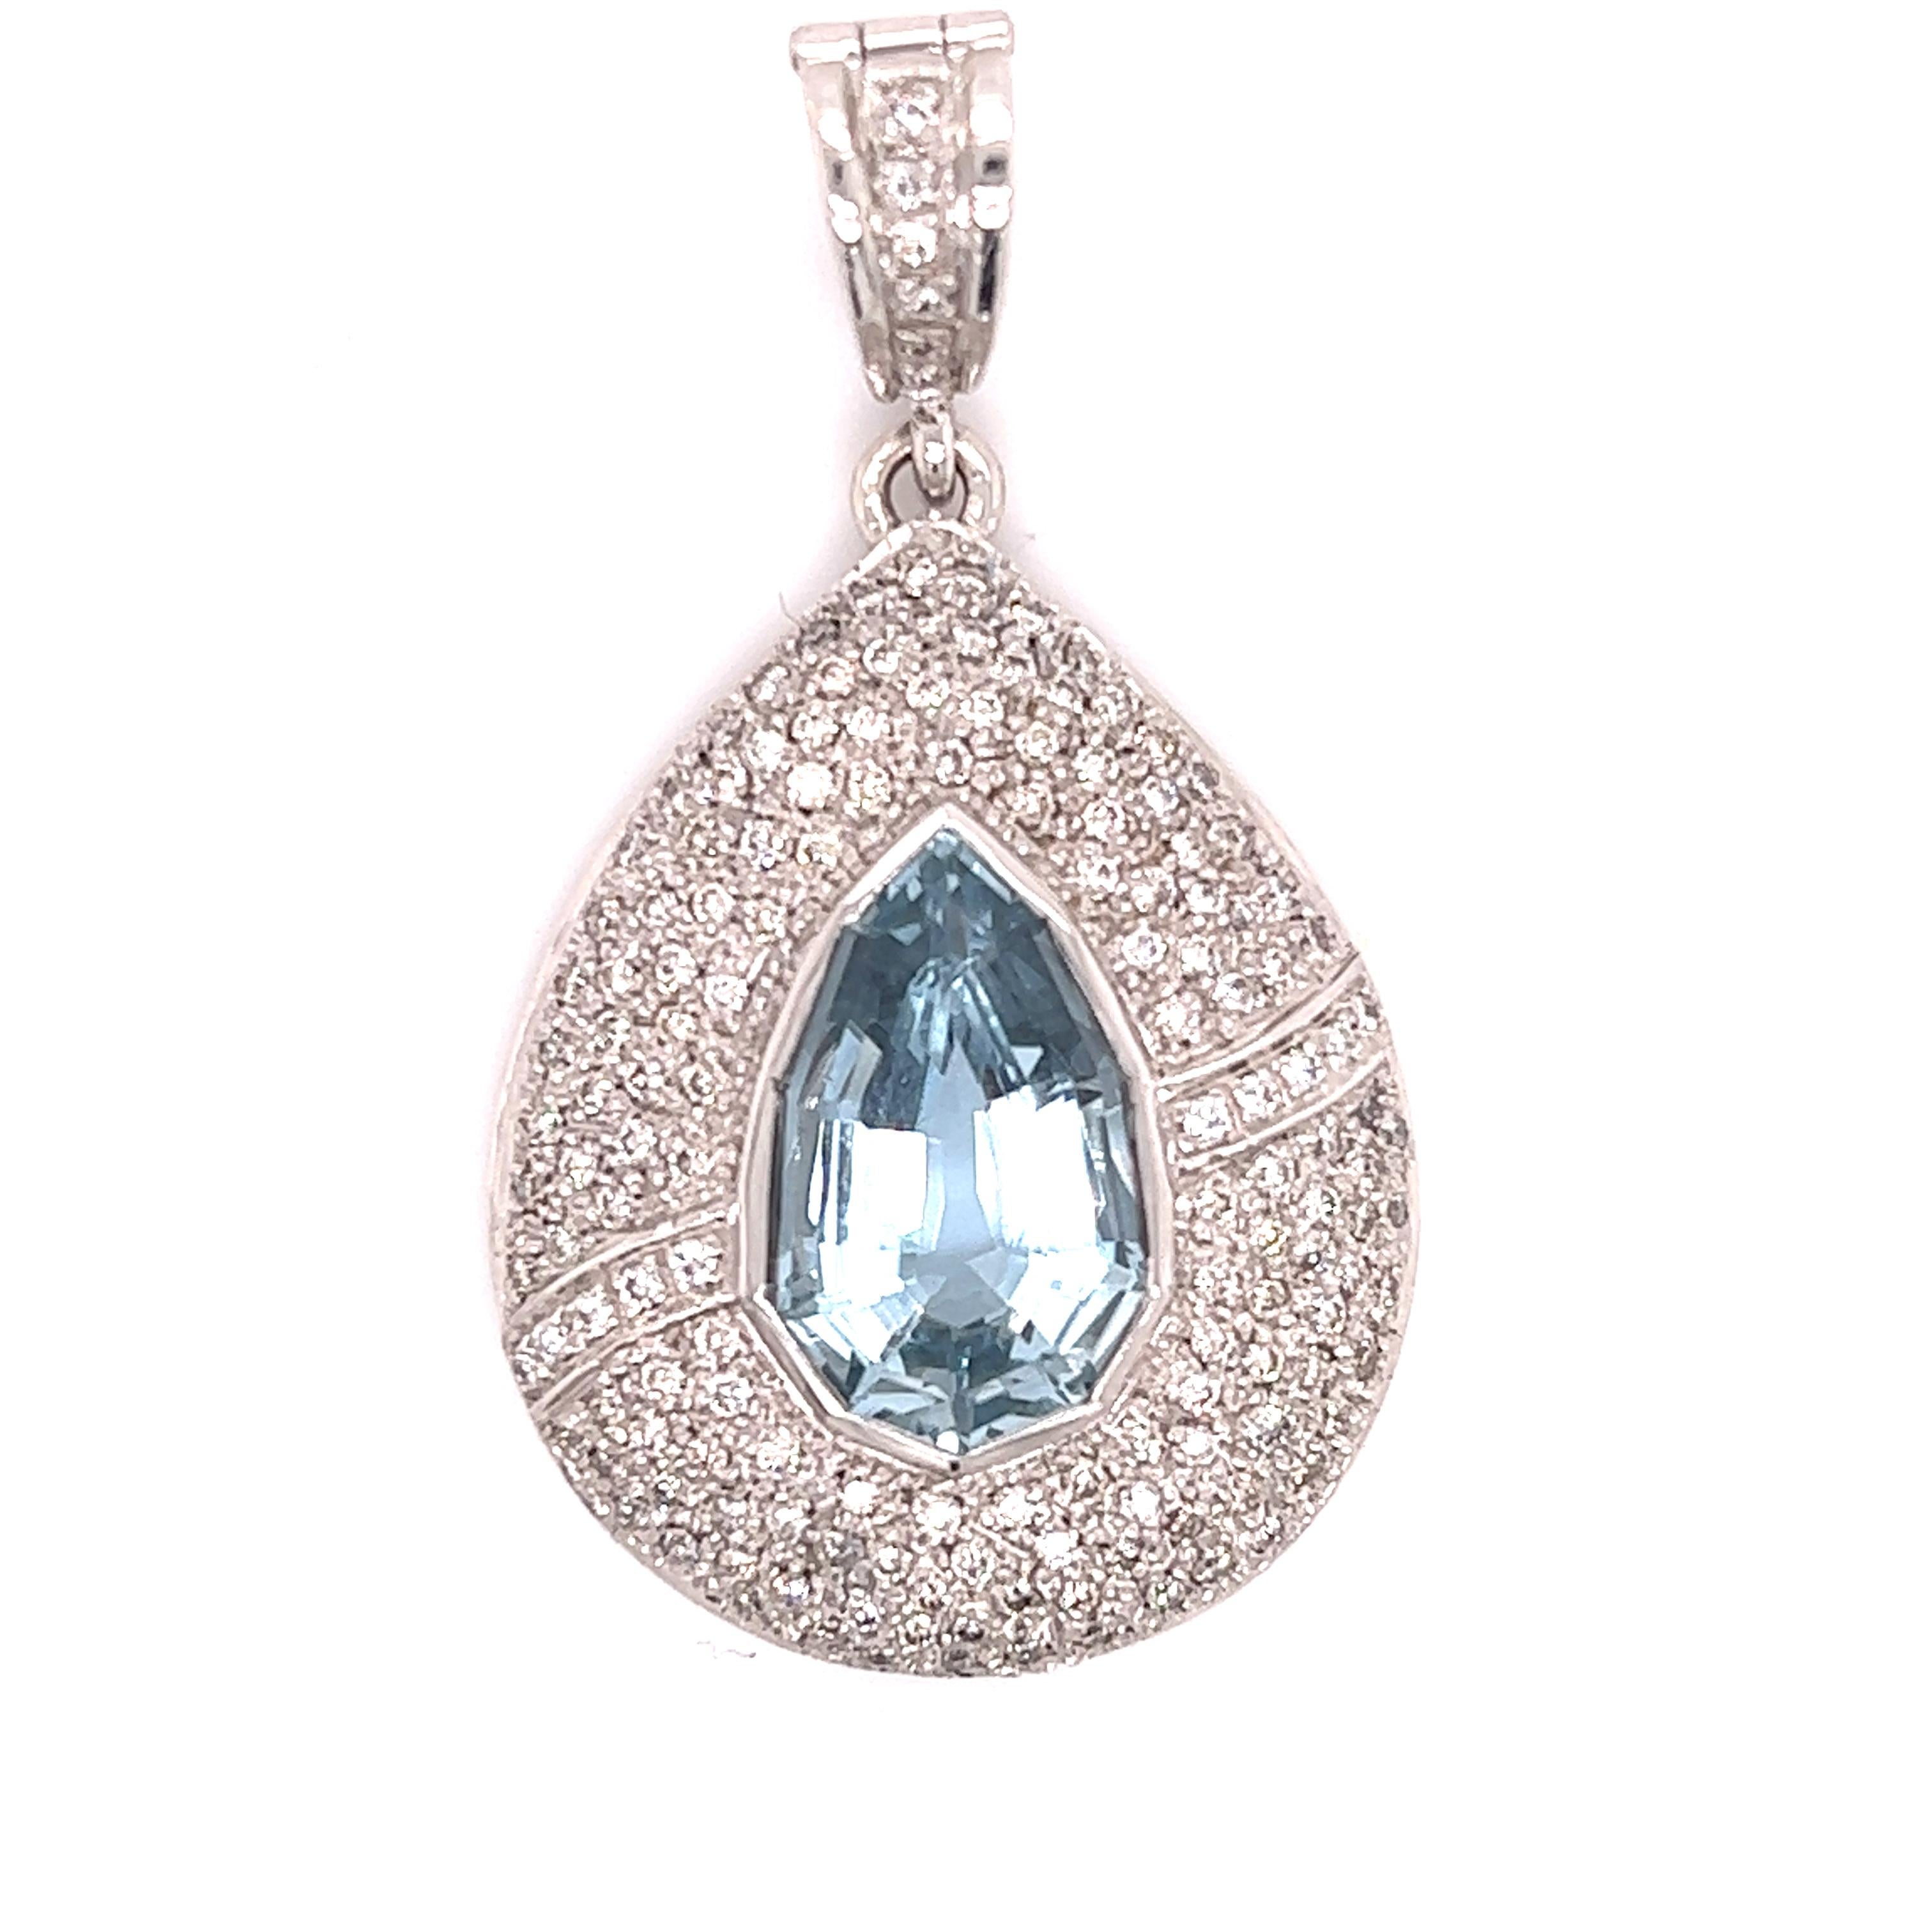 Stand out item for your consideration. This fantastic design is crafted in 18k white gold. The highlight of the pendant is one approximate 8.01 carat aquamarine gemstone cut in a mesmerizing shield shape. The aqua marine has sharp edges and